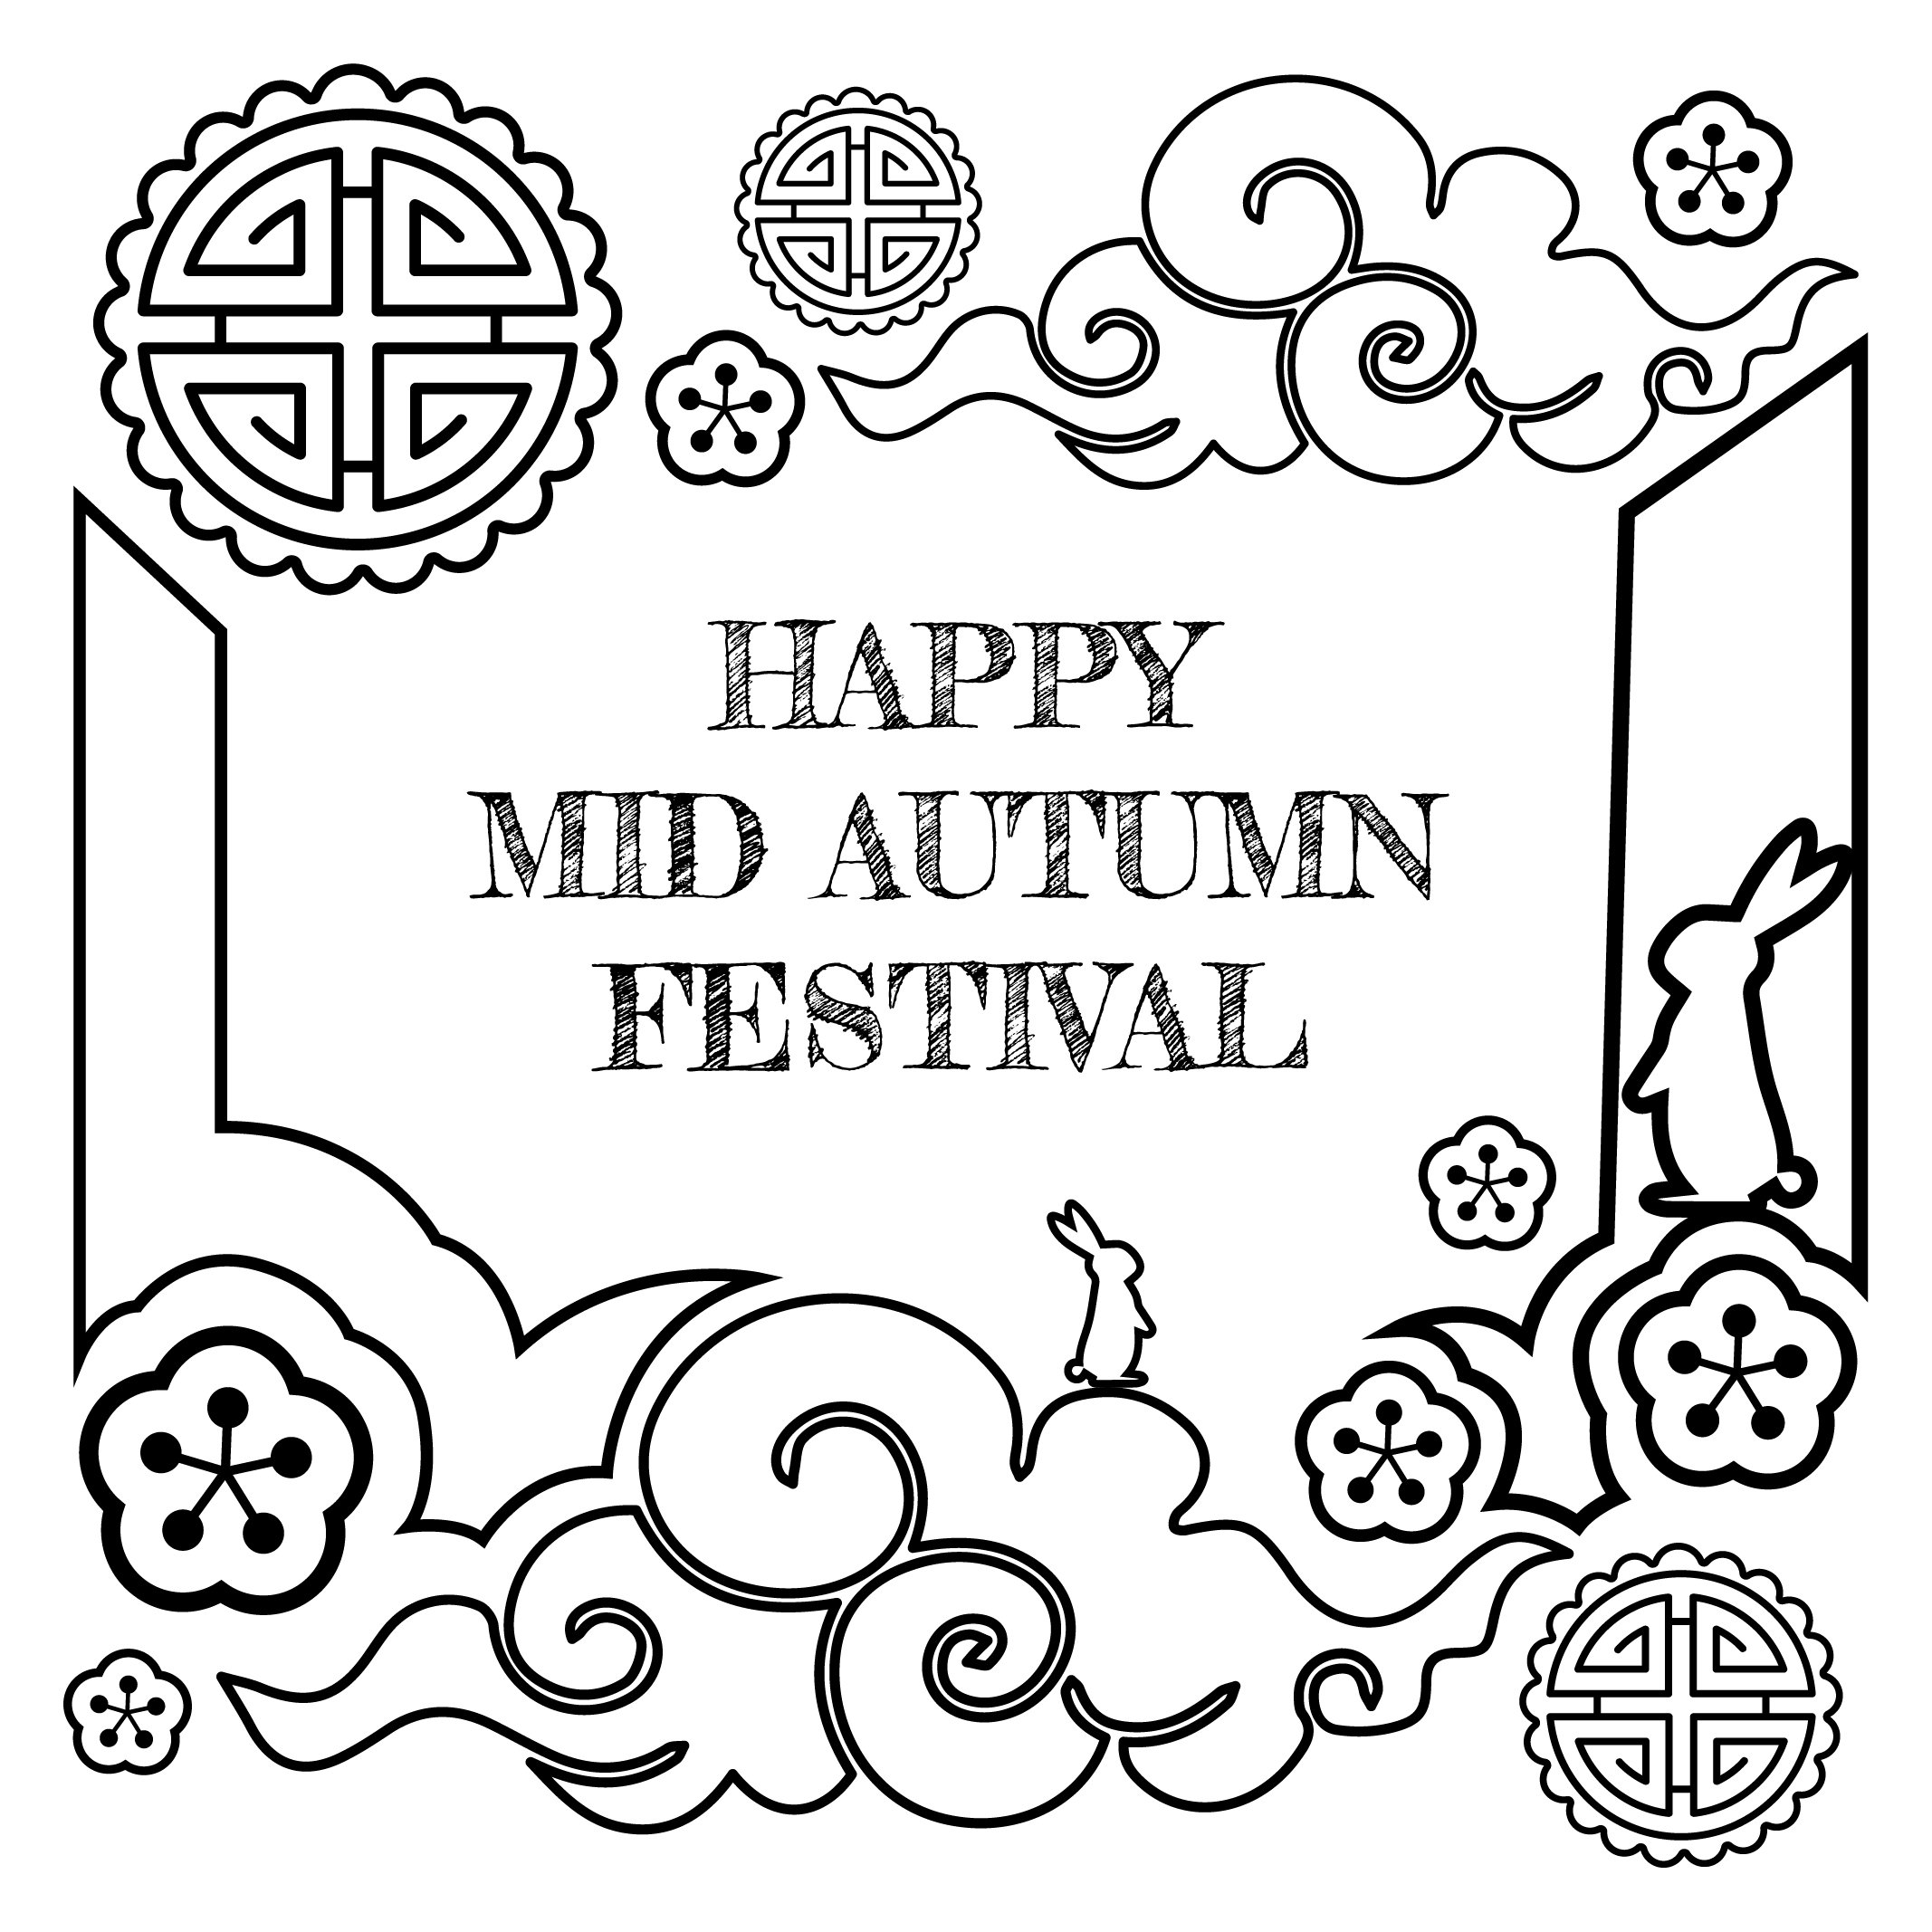 FREE Mid-Autumn Festival Drawings Template - Download in Word, Illustrator,  Photoshop, EPS, SVG, JPG, PNG | Template.net